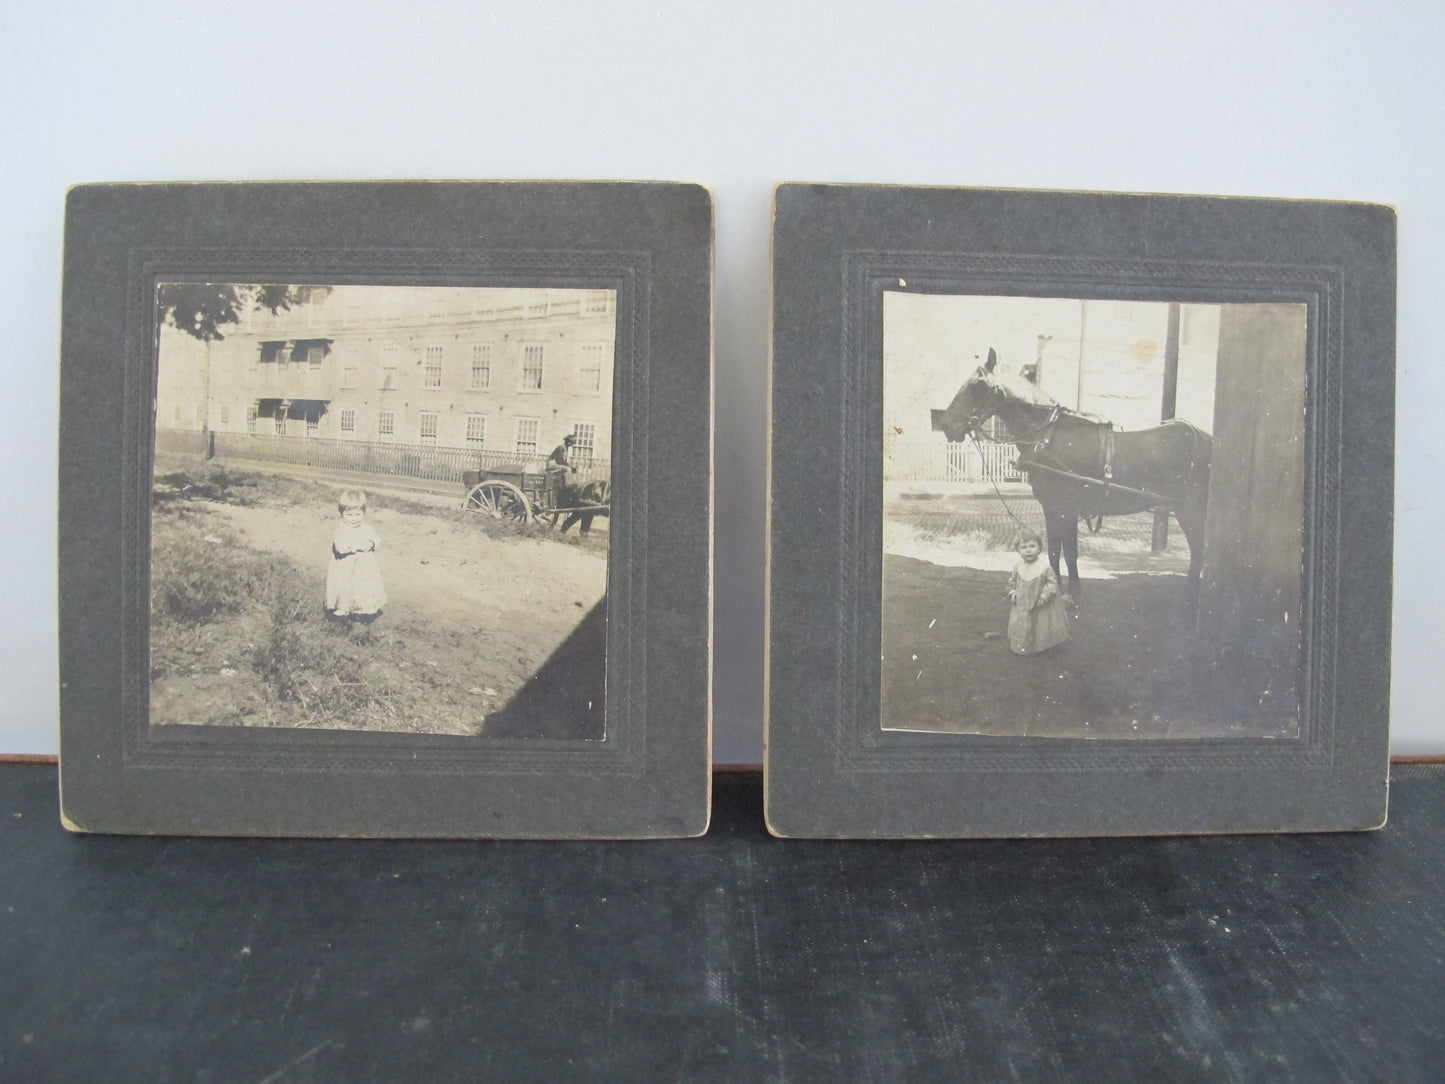 Victorian Photo Snapshot Pair Unposed Child Mill Factory Horse and Cart New Bedford Massachusetts 1890s 1900s